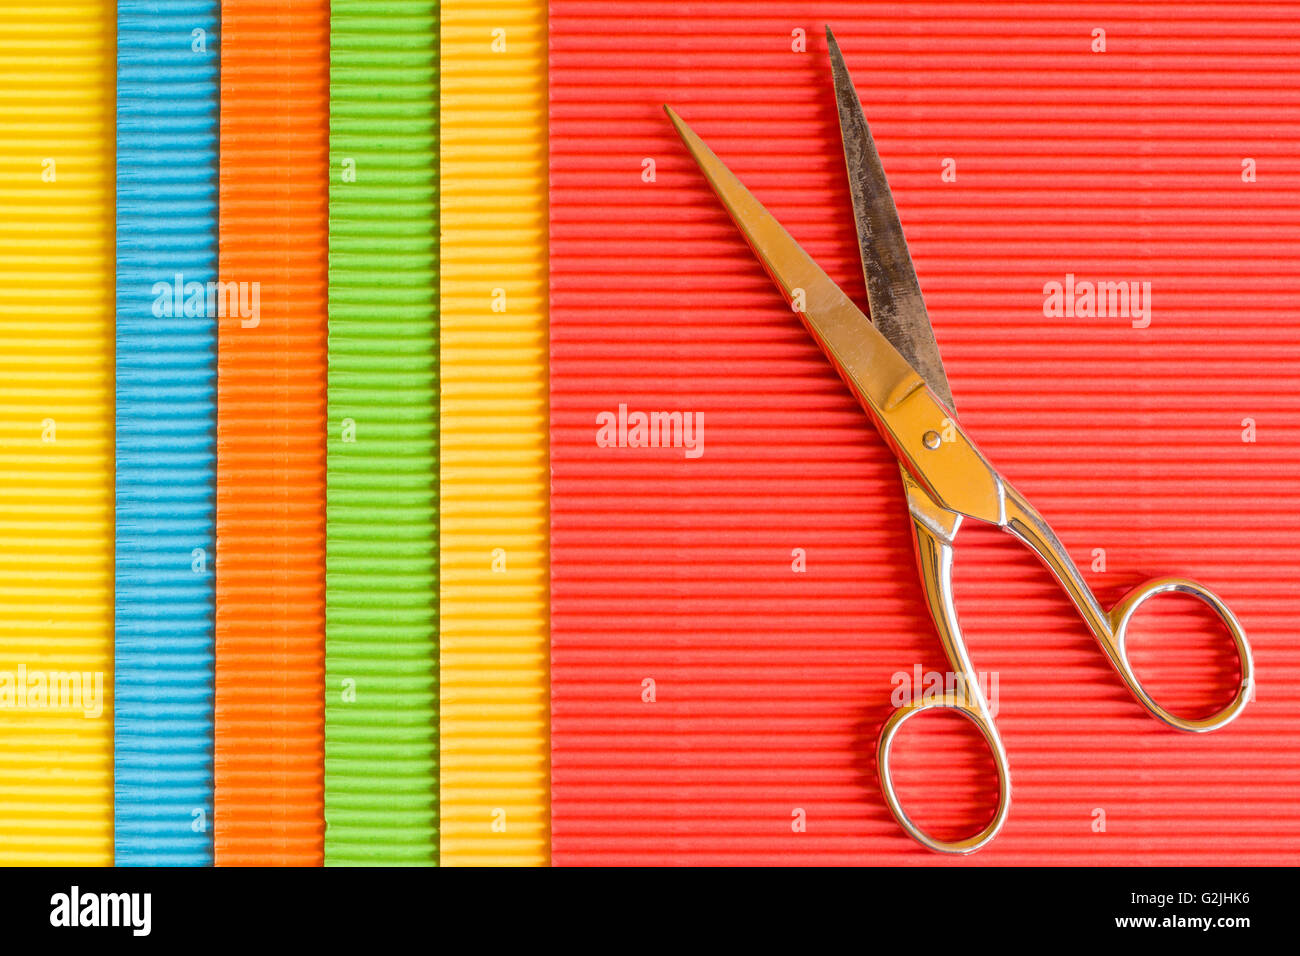 Items For Creativity Sheets Of Colored Cardboard Scissors Compasses Pencil  And Ruler On A Red Background Stock Photo - Download Image Now - iStock